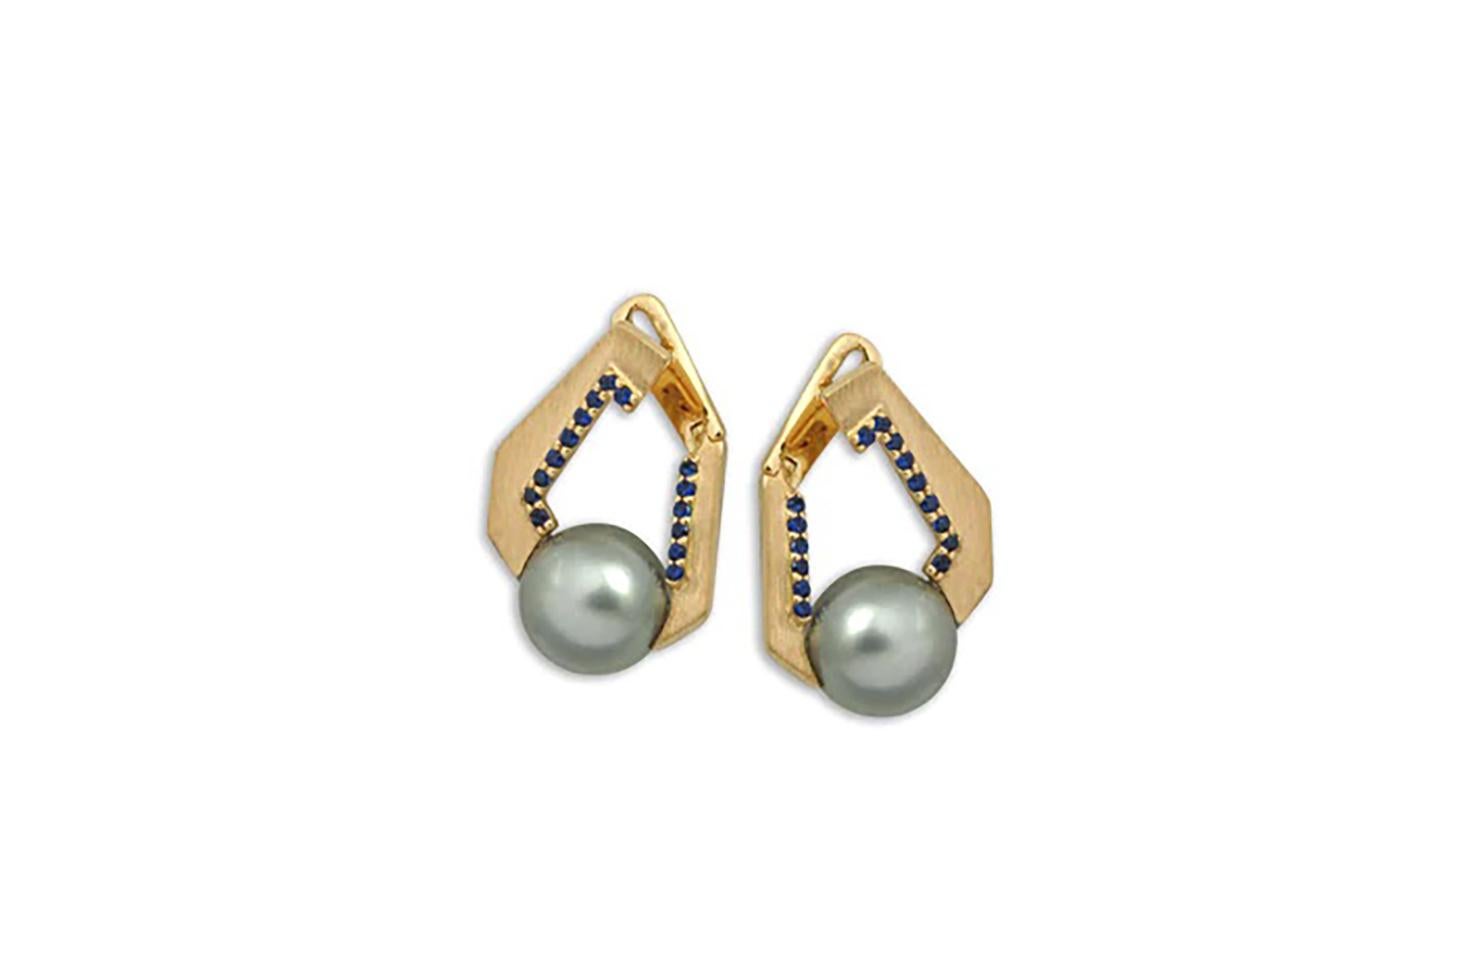 Origami Link no. 5 South Sea Pearl with Blue Sapphire Earrings set in 18K Gold 3